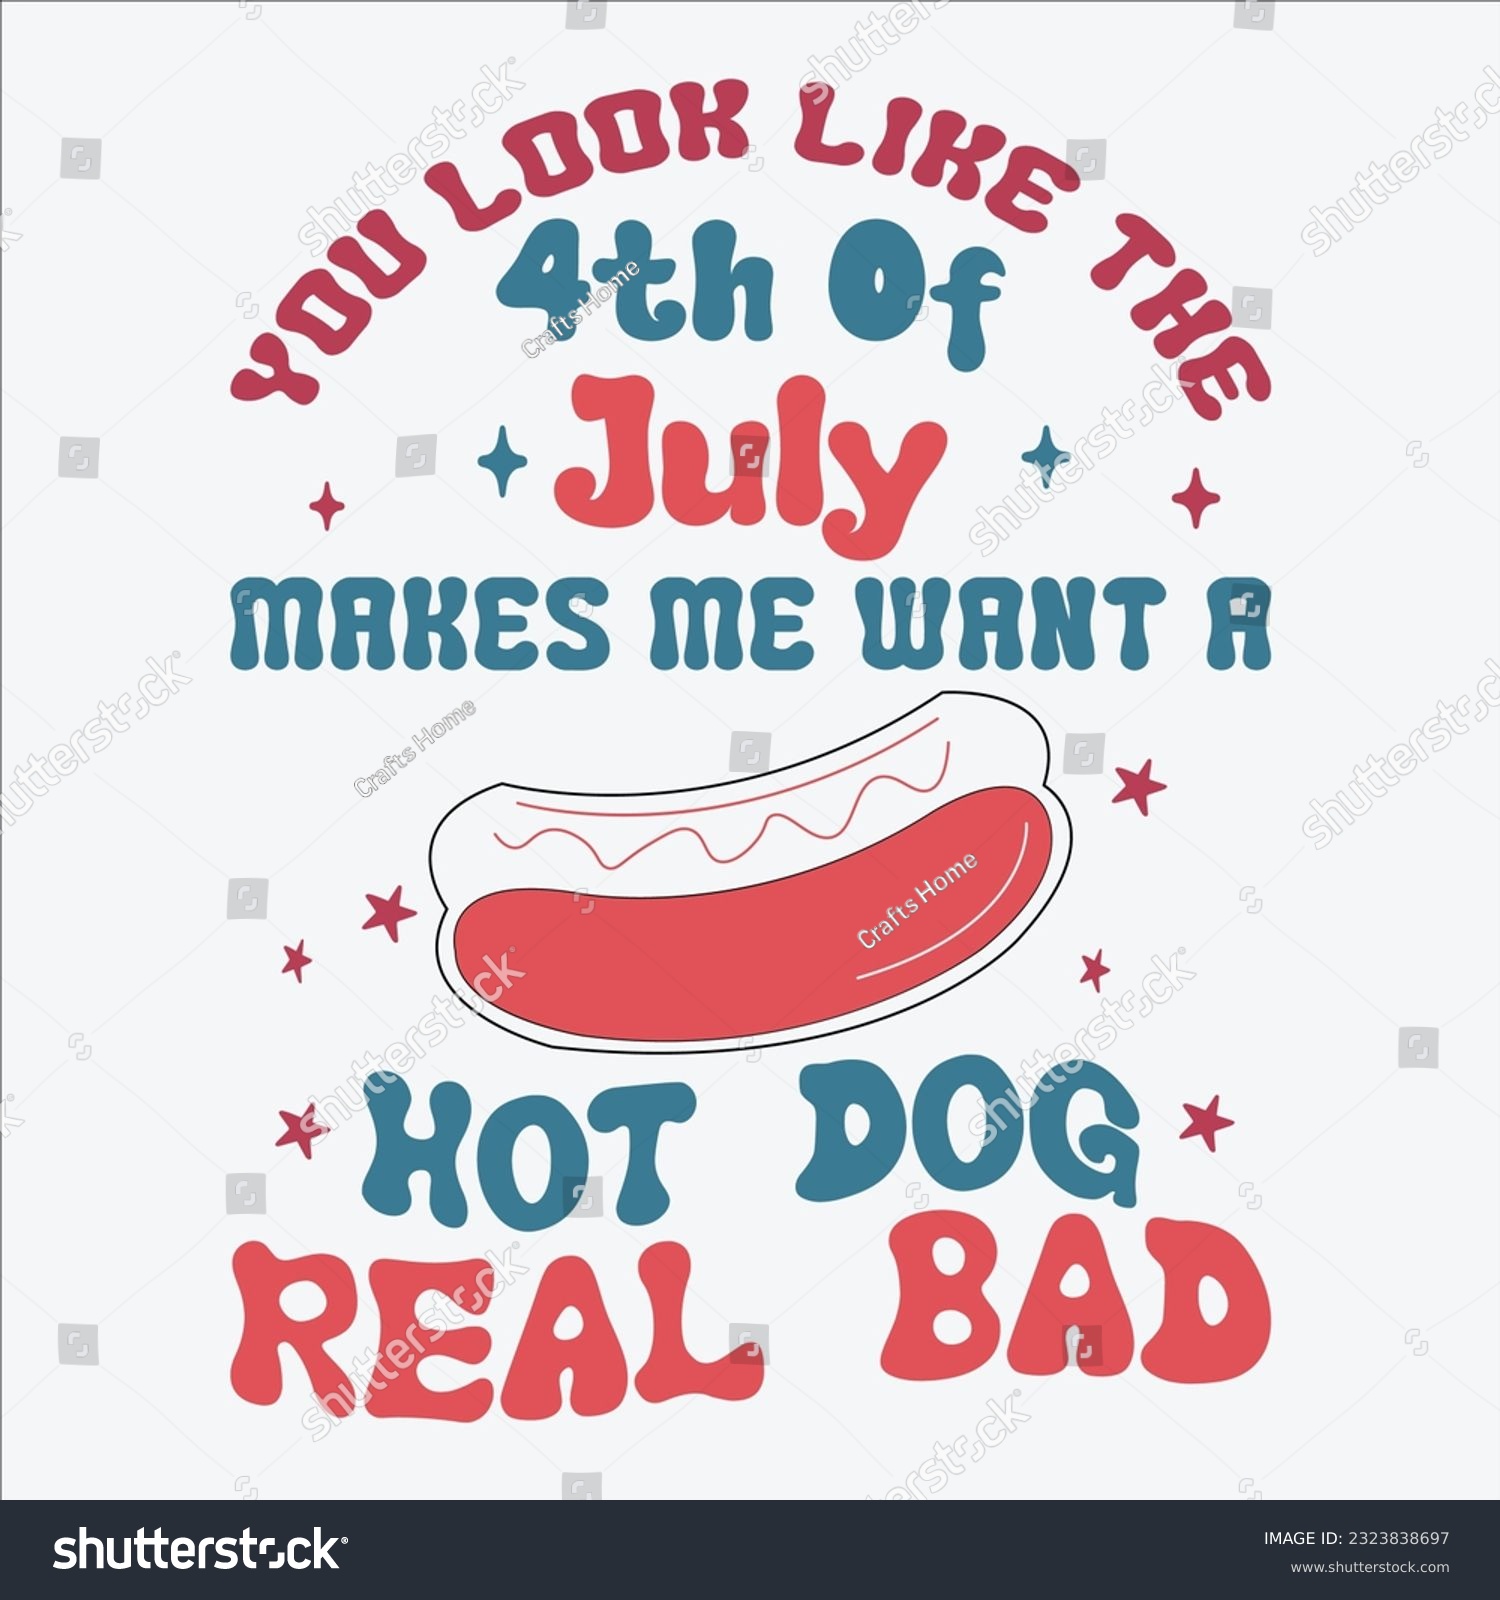 SVG of  You Look Like The 4th Of July Makes Me Want A Hot Dog Real Bad, 4th Of July, 4th Of July Svg, Patriotic, America, Usa, American Flag, America Day, Groovy ,Independence Day svg